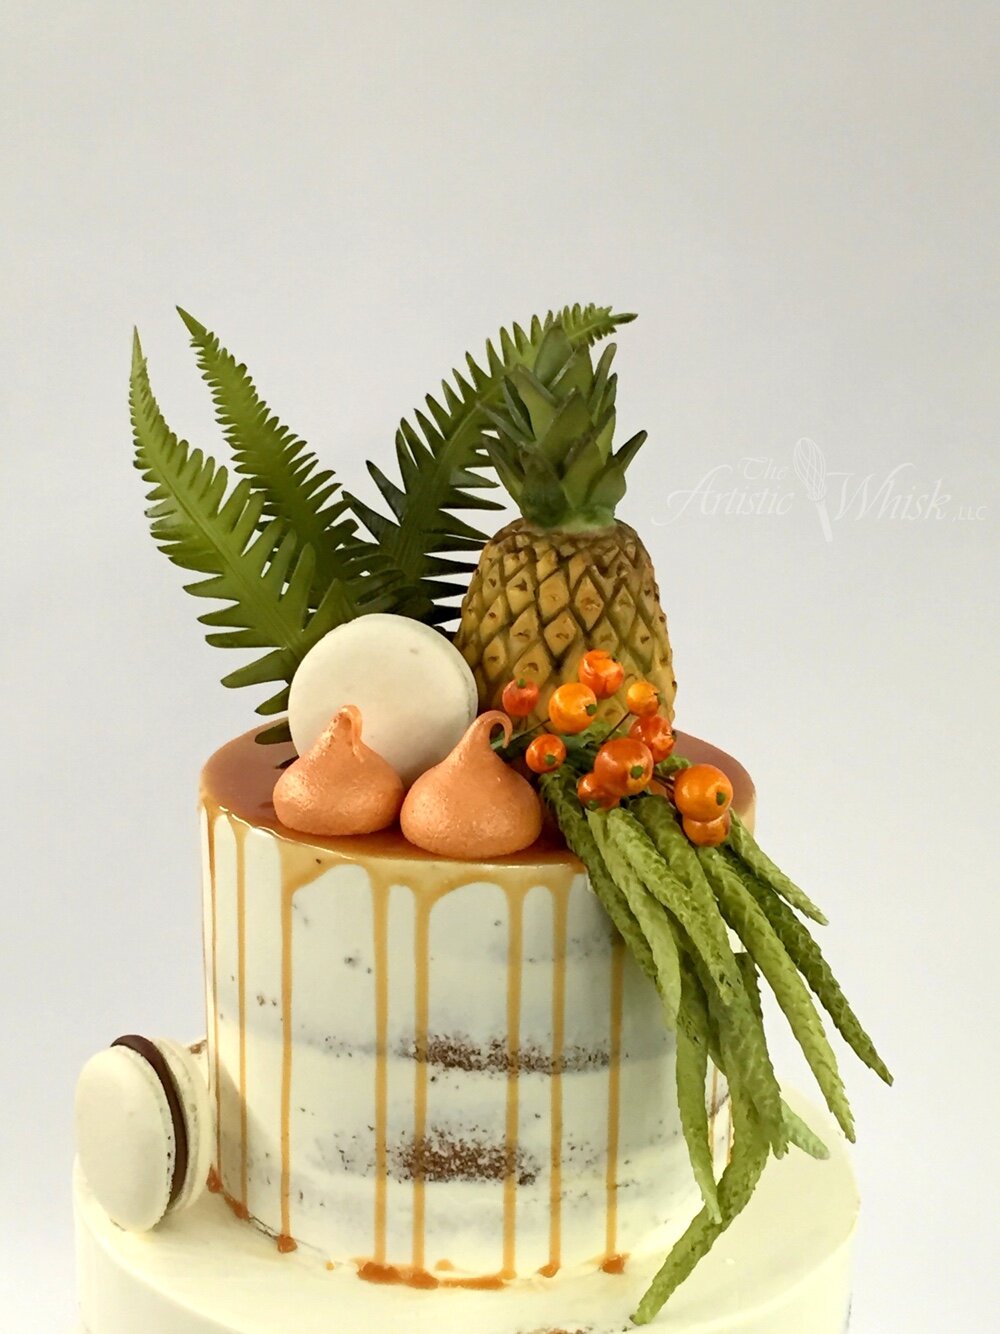 Edible Pineapple and Greenery - Up Close Details.jpg